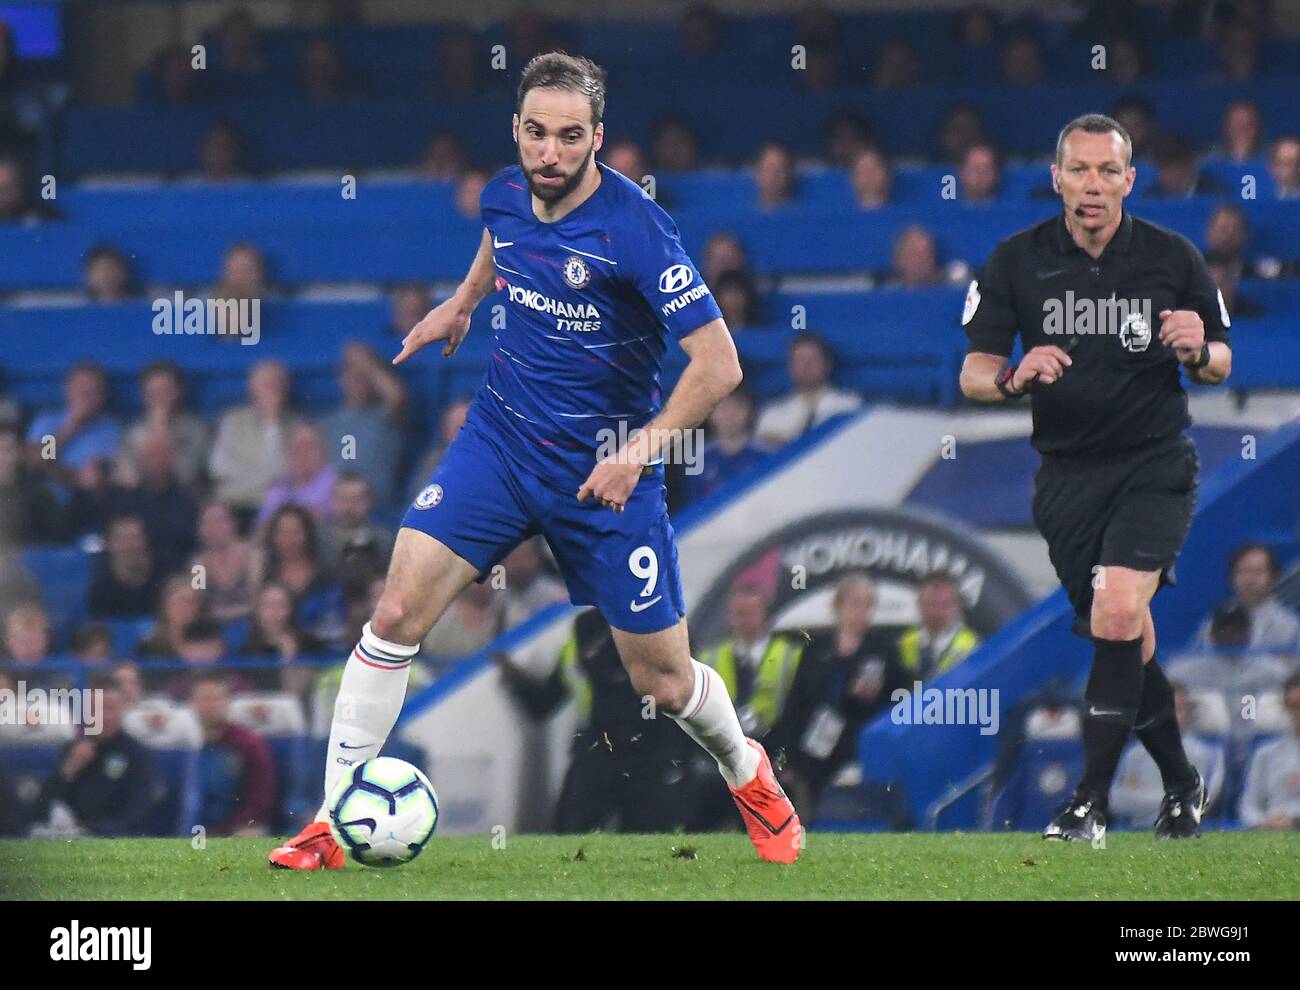 LONDON, ENGLAND - APRIL 22, 2019: Gonzalo Higuain of Chelsea pictured during the 2018/19 Premier League game between Chelsea FC and Burnley FC at Stam Stock Photo